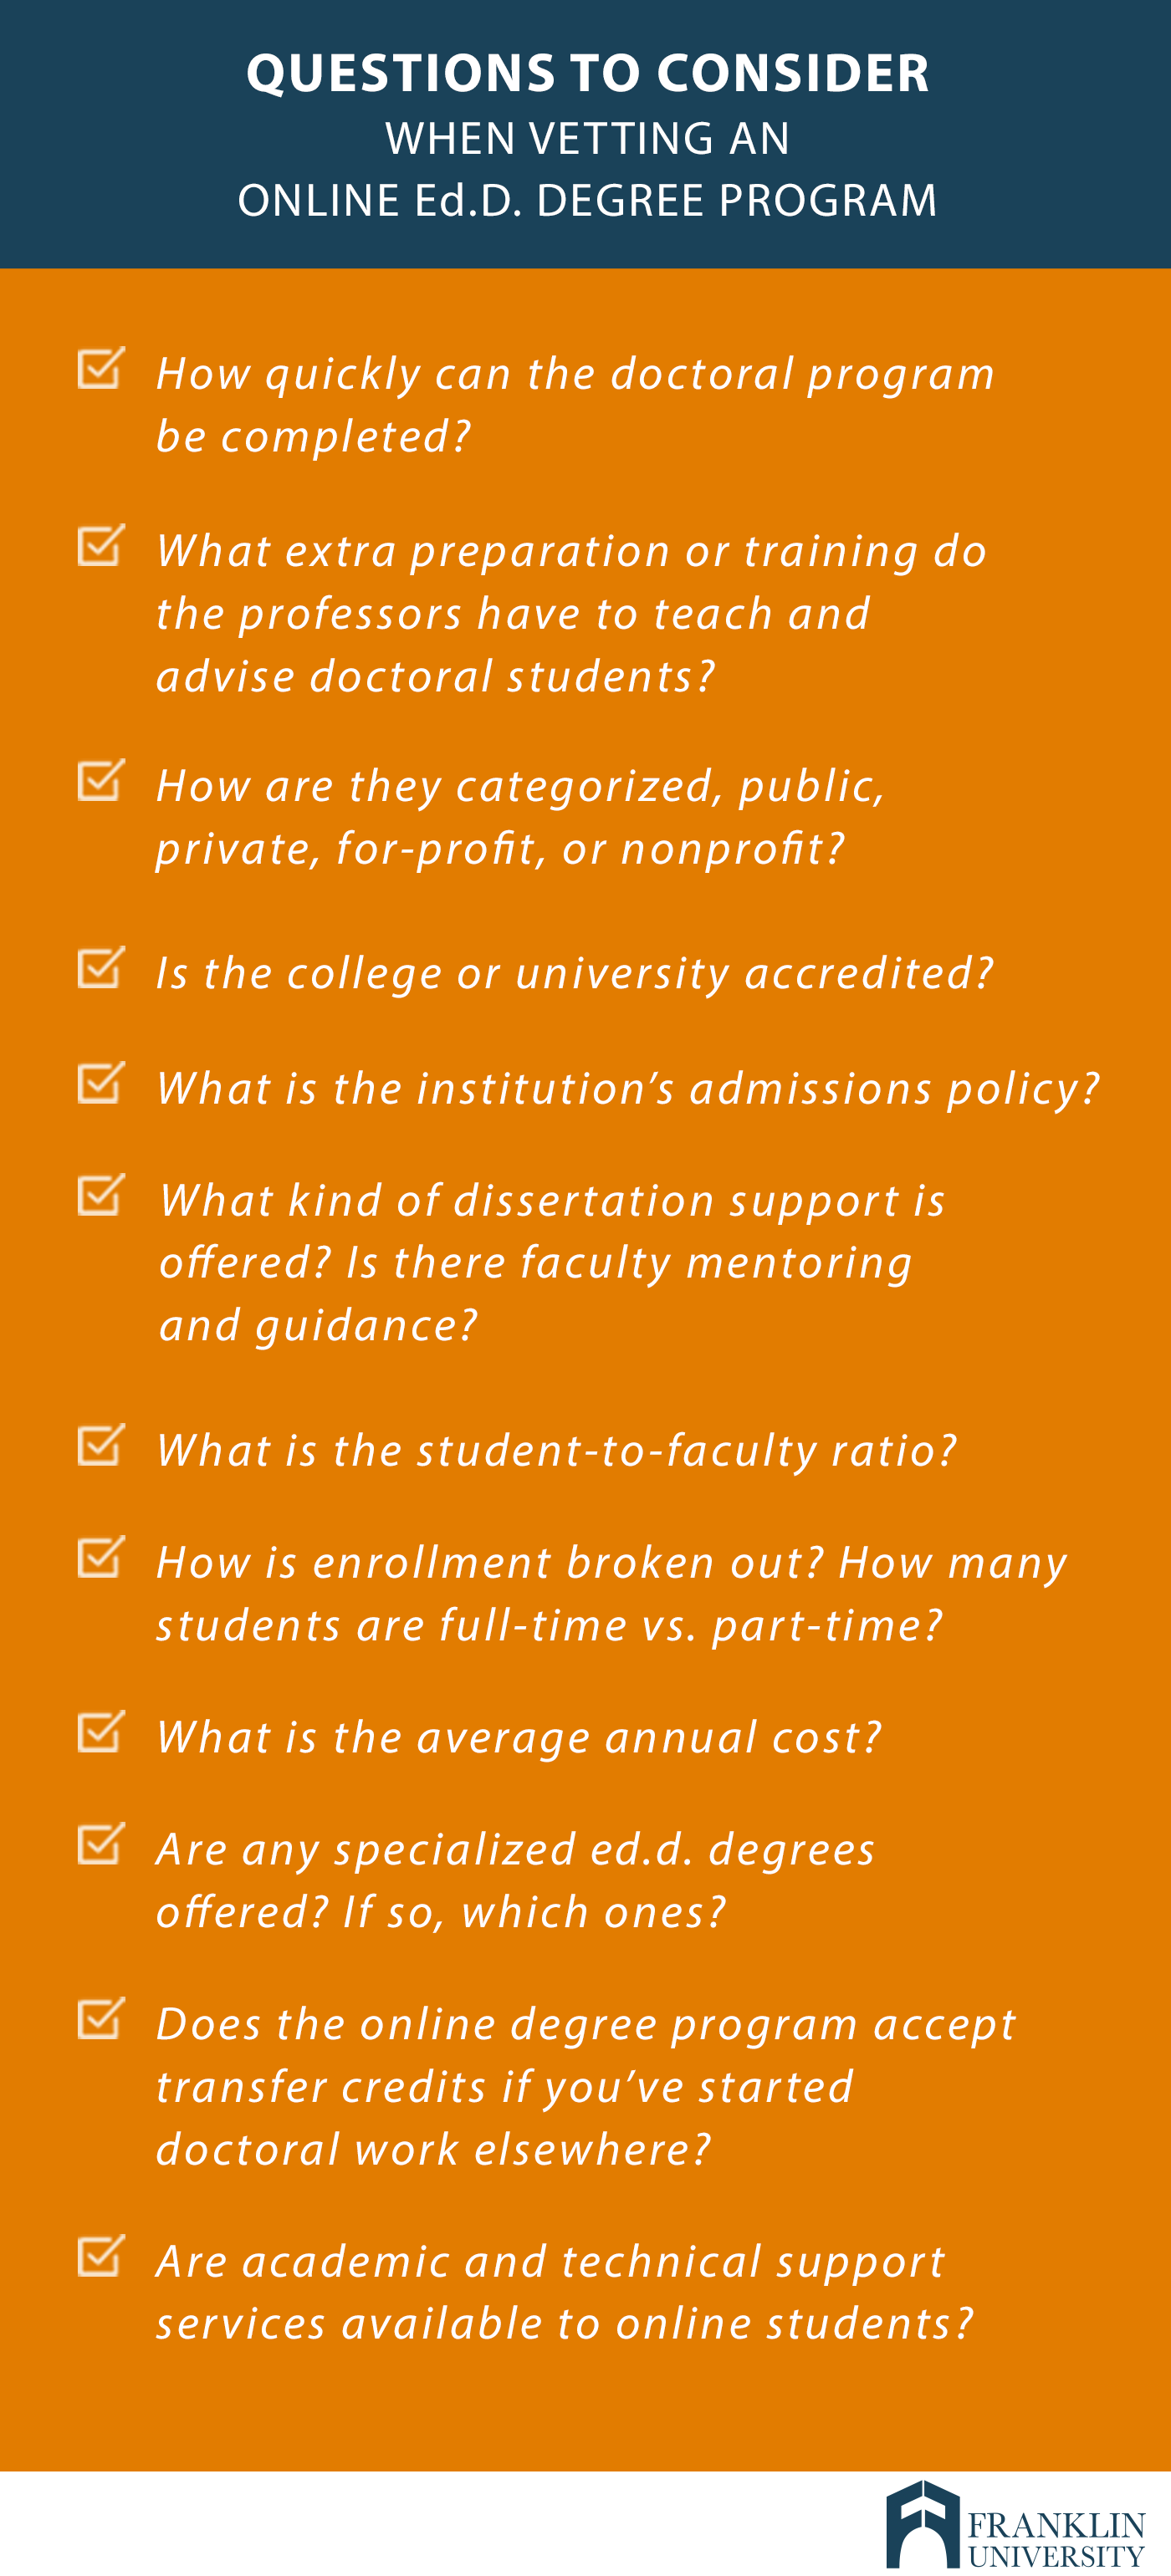 graphic describes the questions to consider when vetting an online Ed.D. degree program